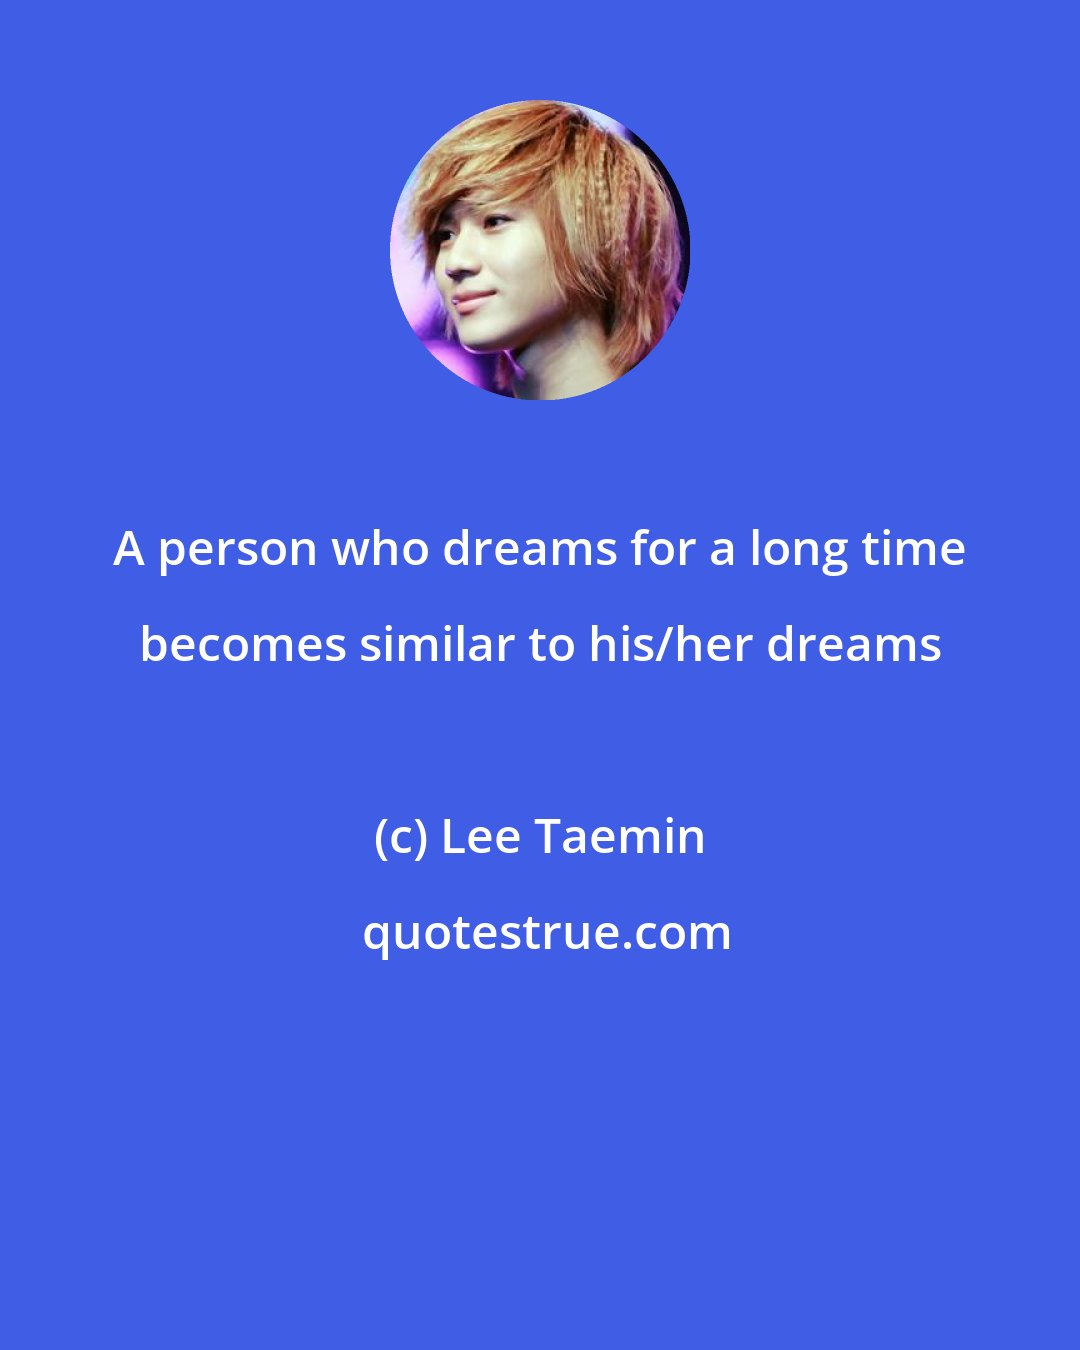 Lee Taemin: A person who dreams for a long time becomes similar to his/her dreams